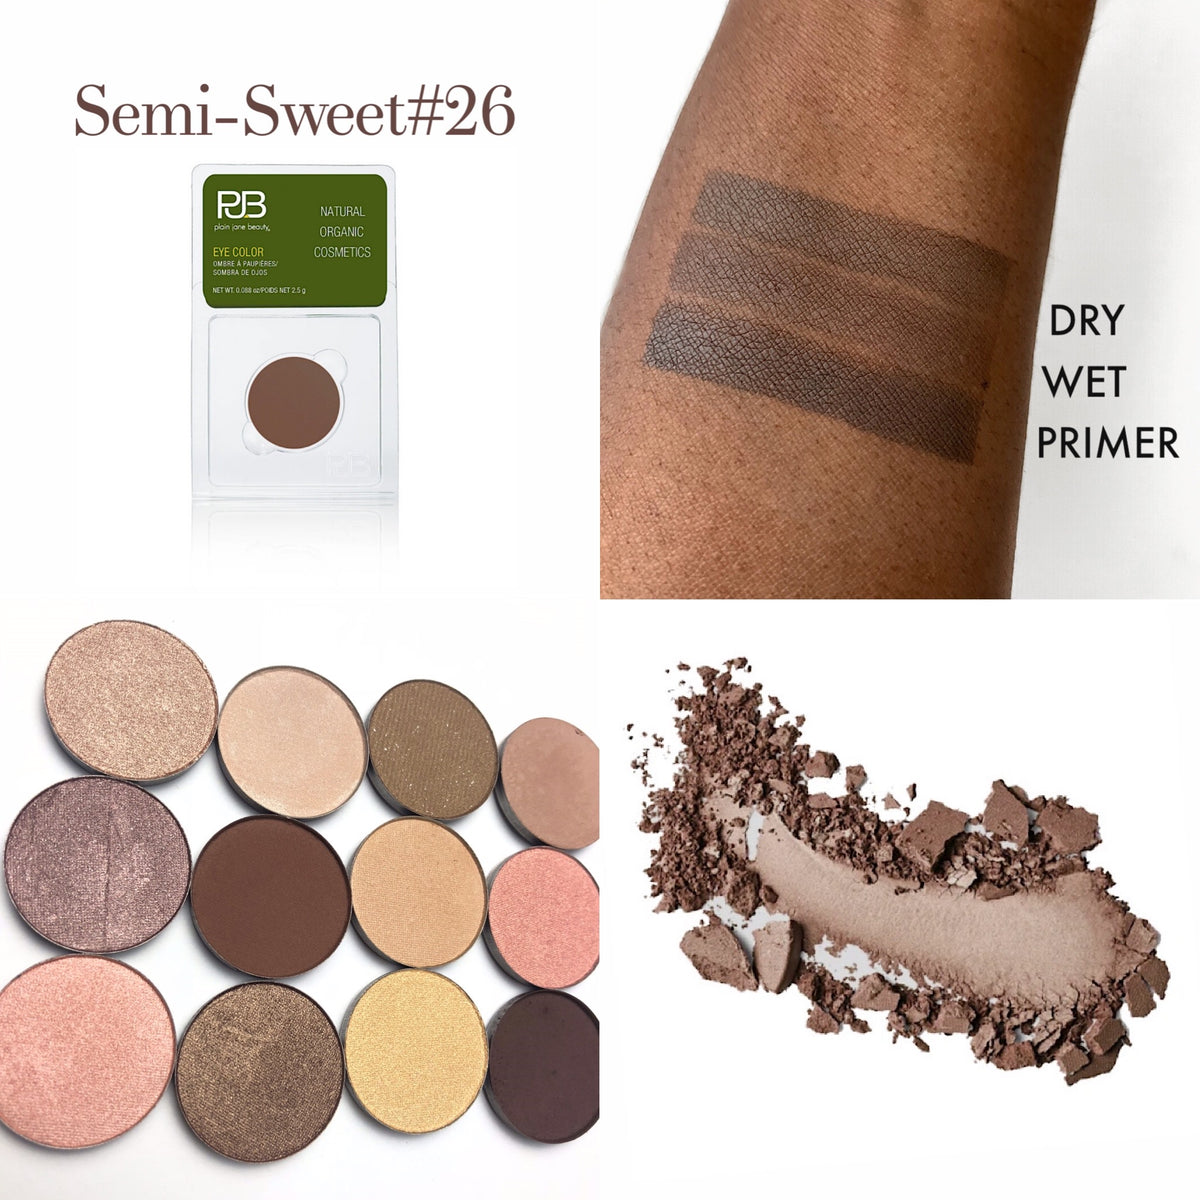 semisweet eye shadow is a brown shade and doesn’t get more classic than a brown smoky eye. Wearable for almost any occasion, it’s a must in your toolkit for brown eyeshadow looks.